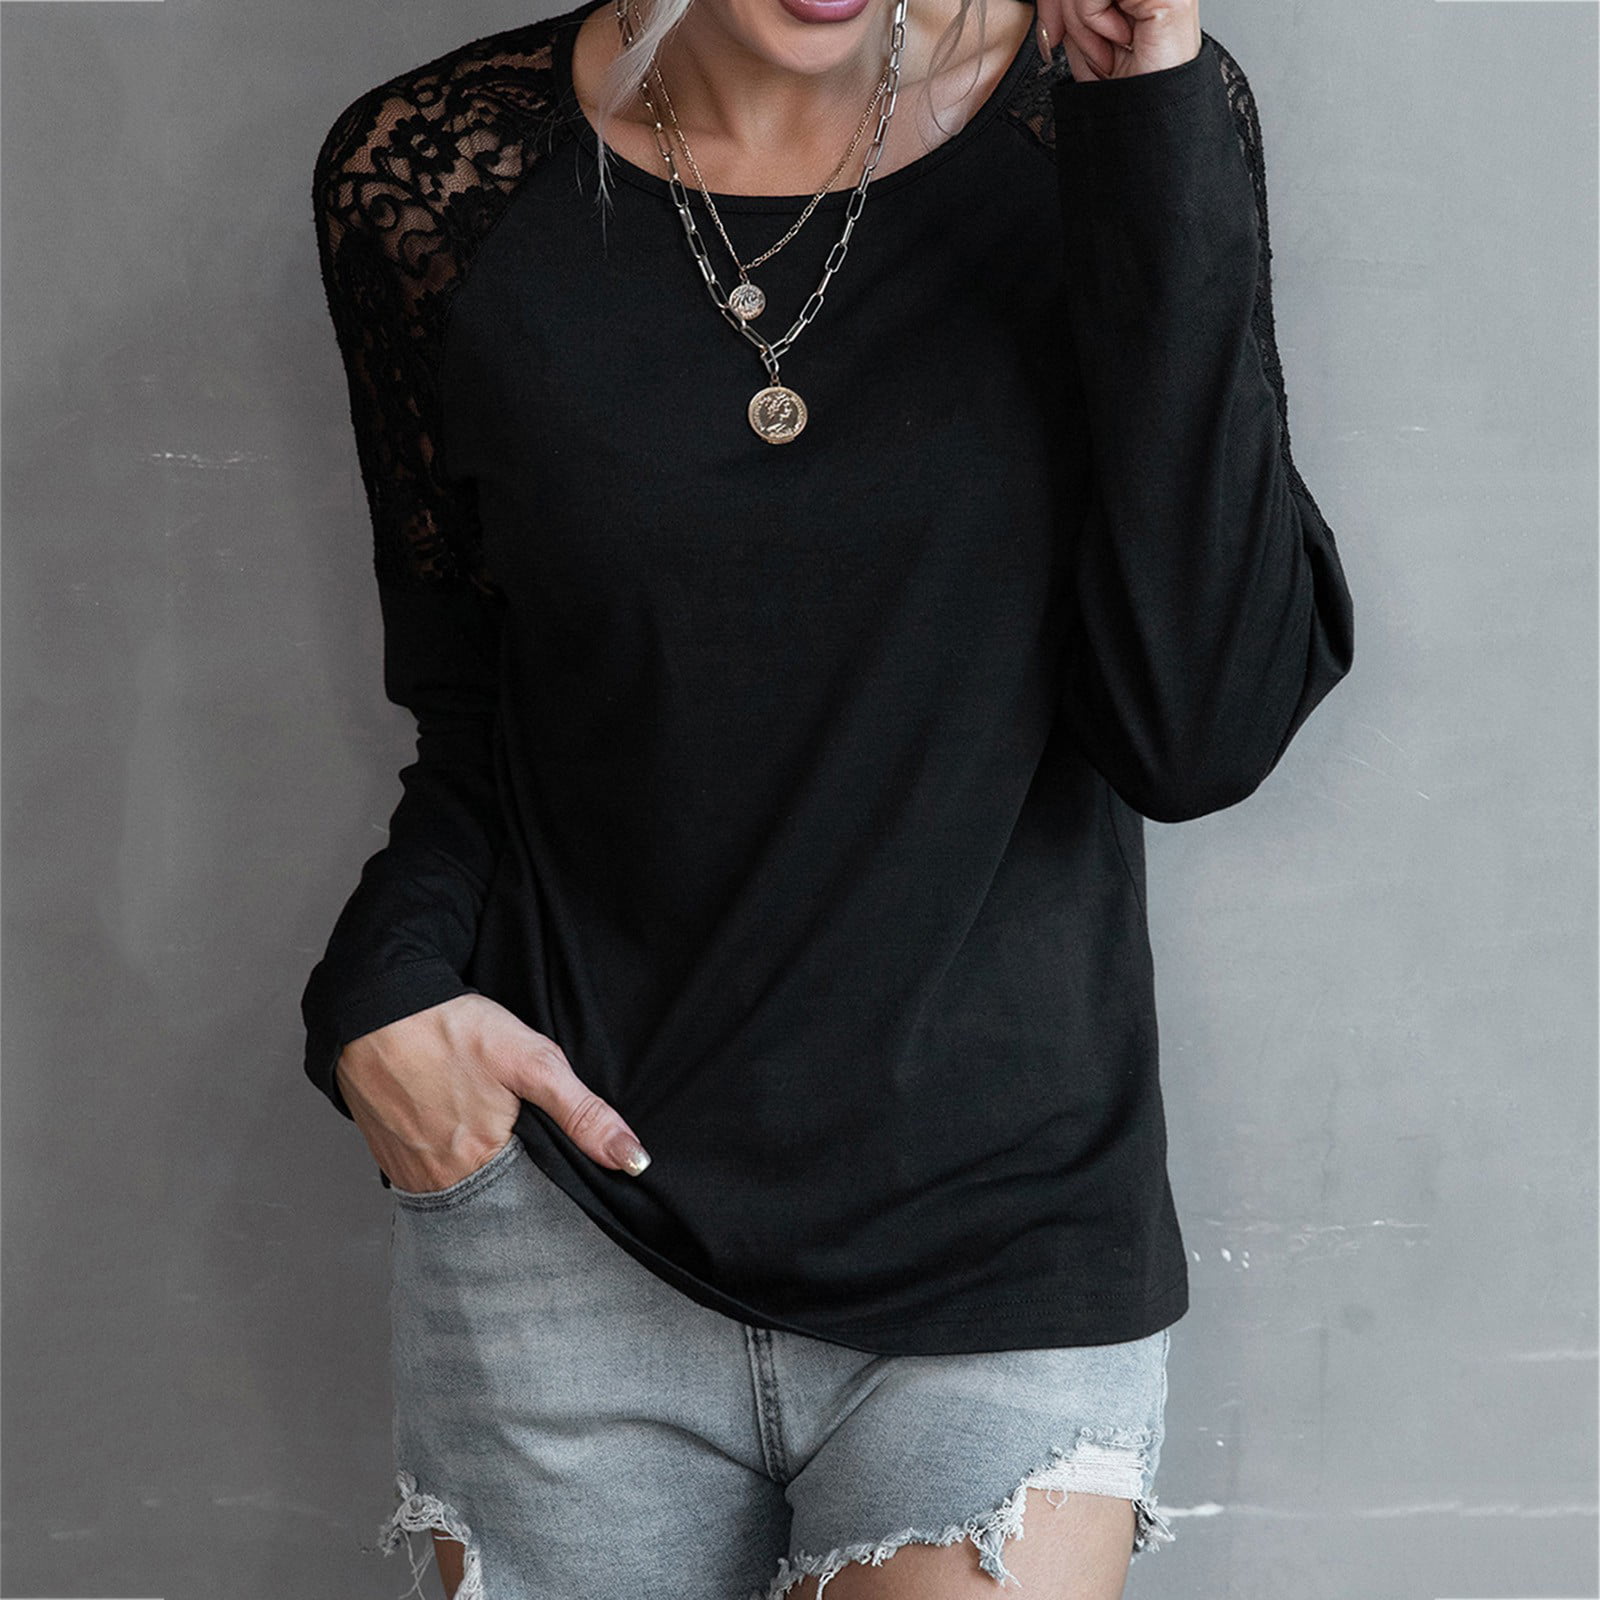 uhnmki Womens Tops Fashion Solid Color Long Sleeve V Neck Hollow Lace Loose  Top T Shirt Blouse Black at  Women's Clothing store